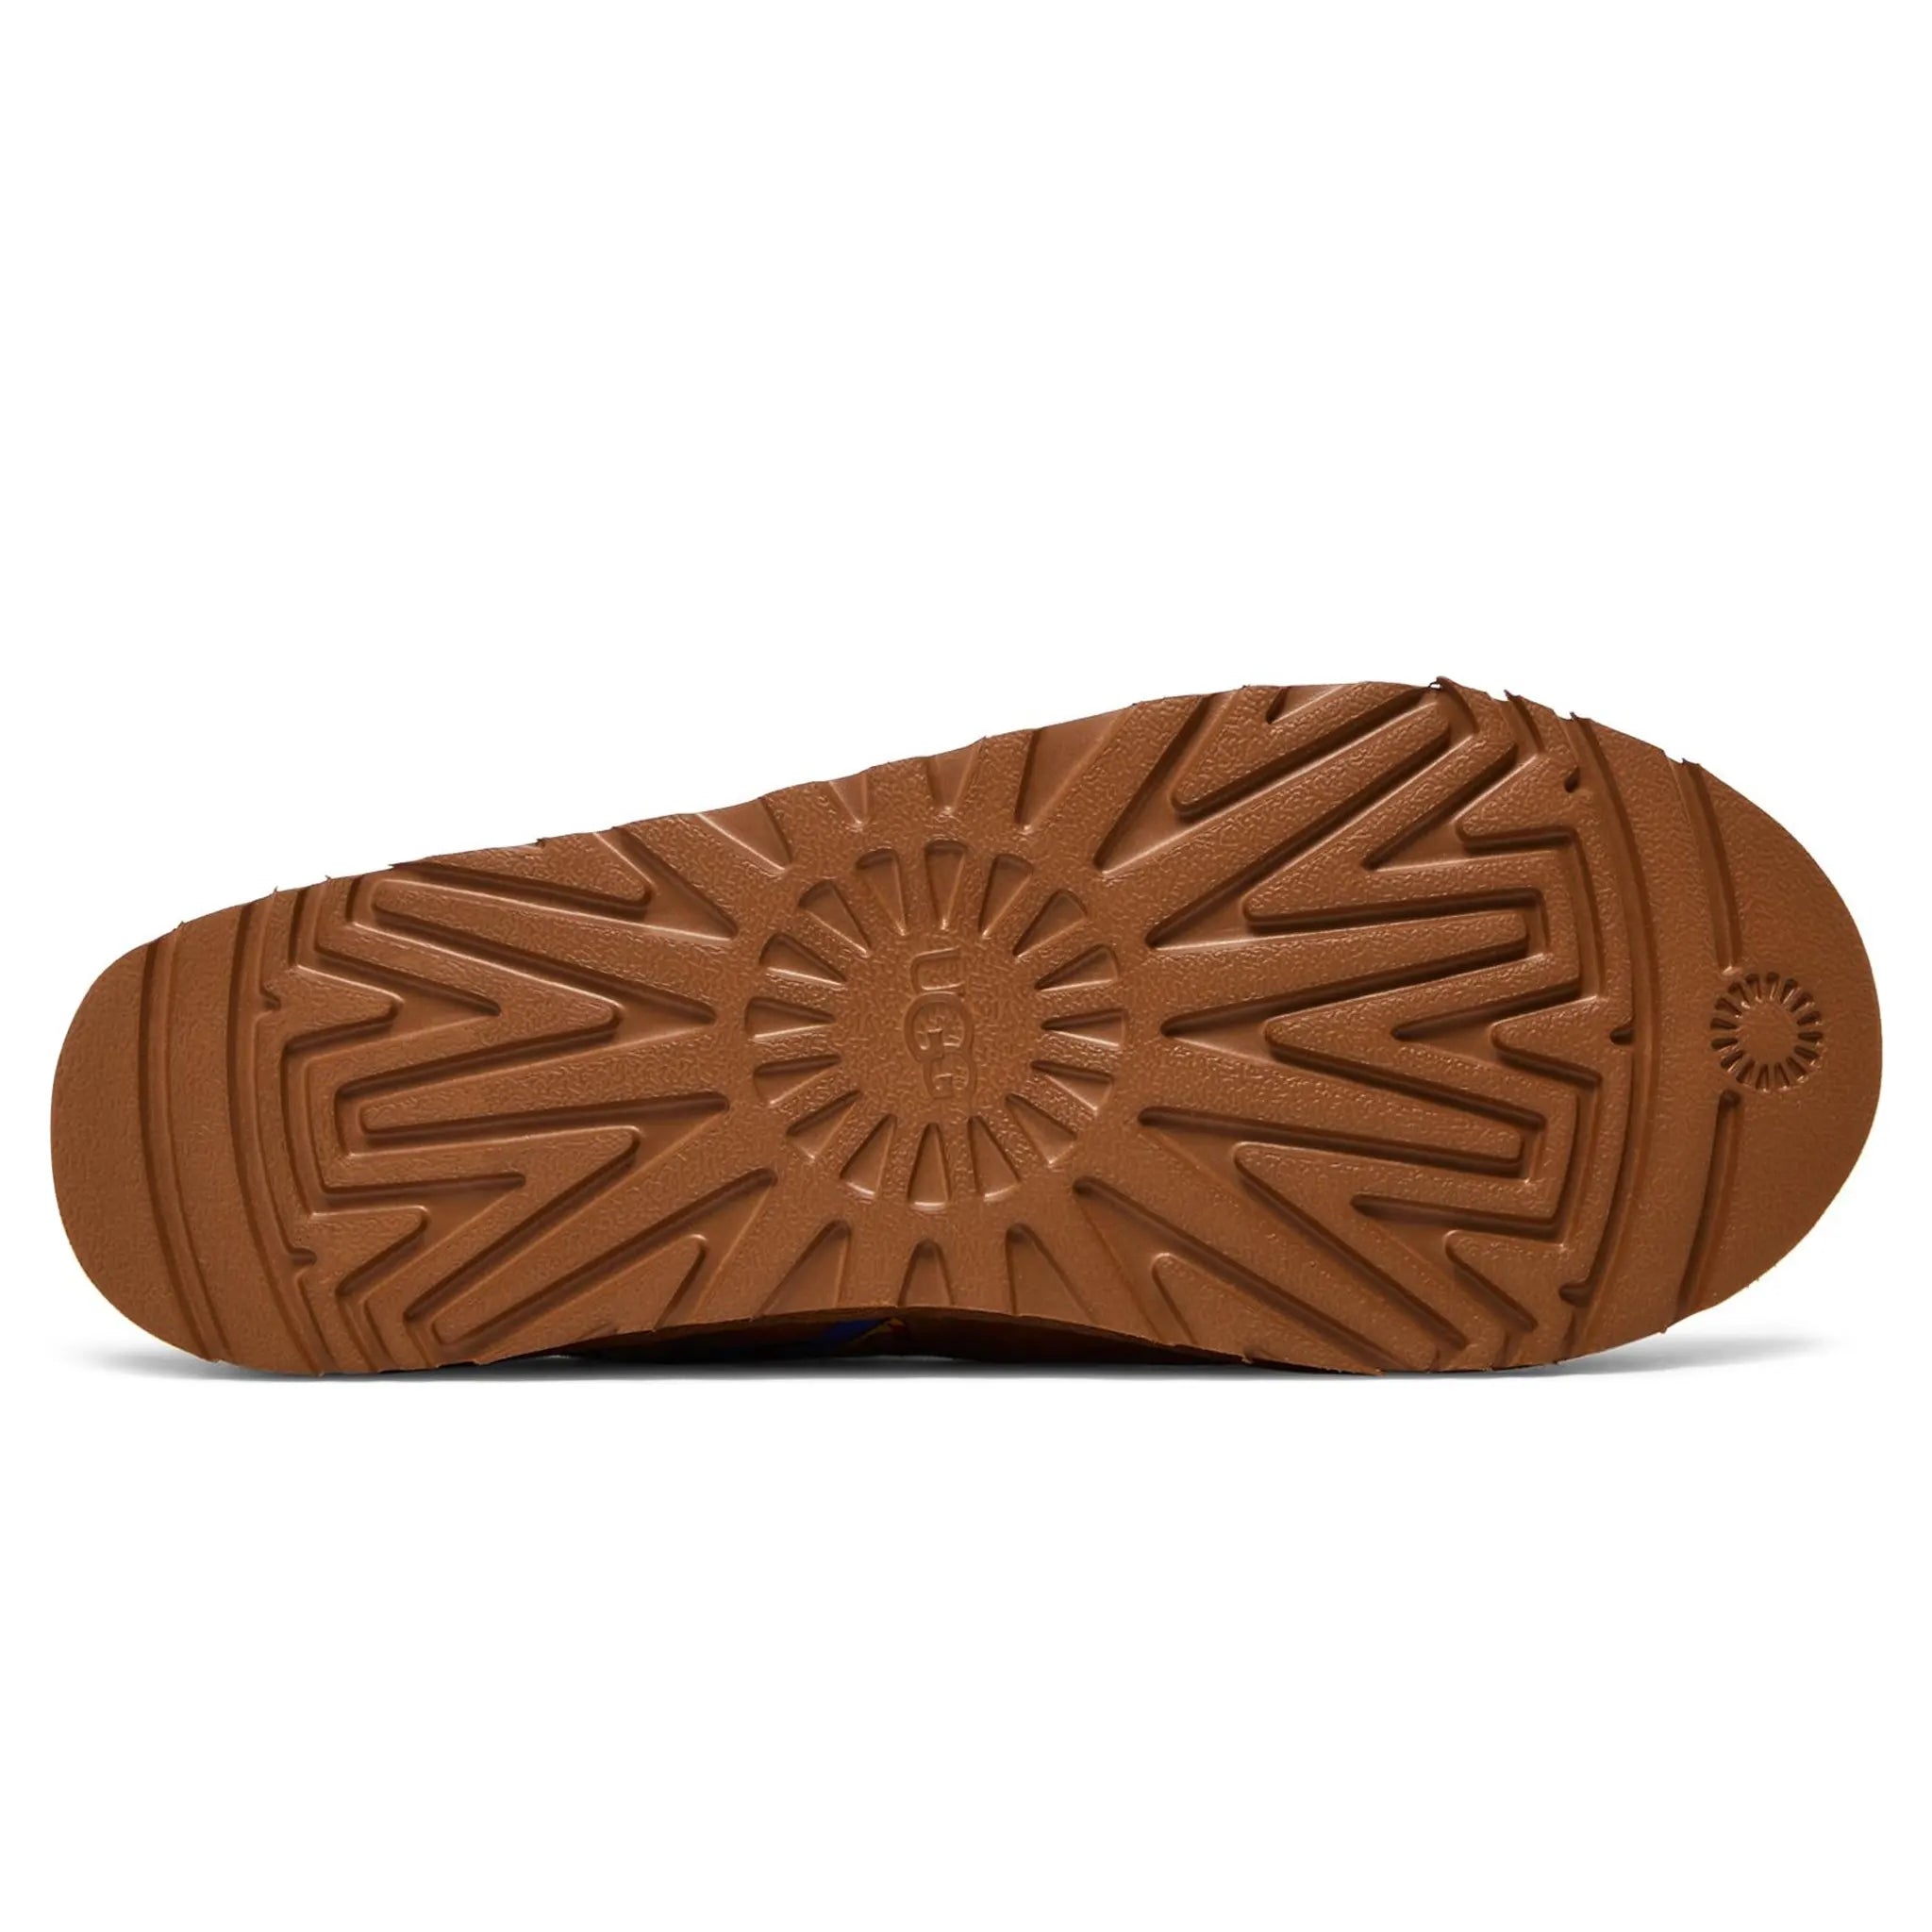 Sole view of Palace x UGG Tasman Chestnut Slippers 1157290-CHE